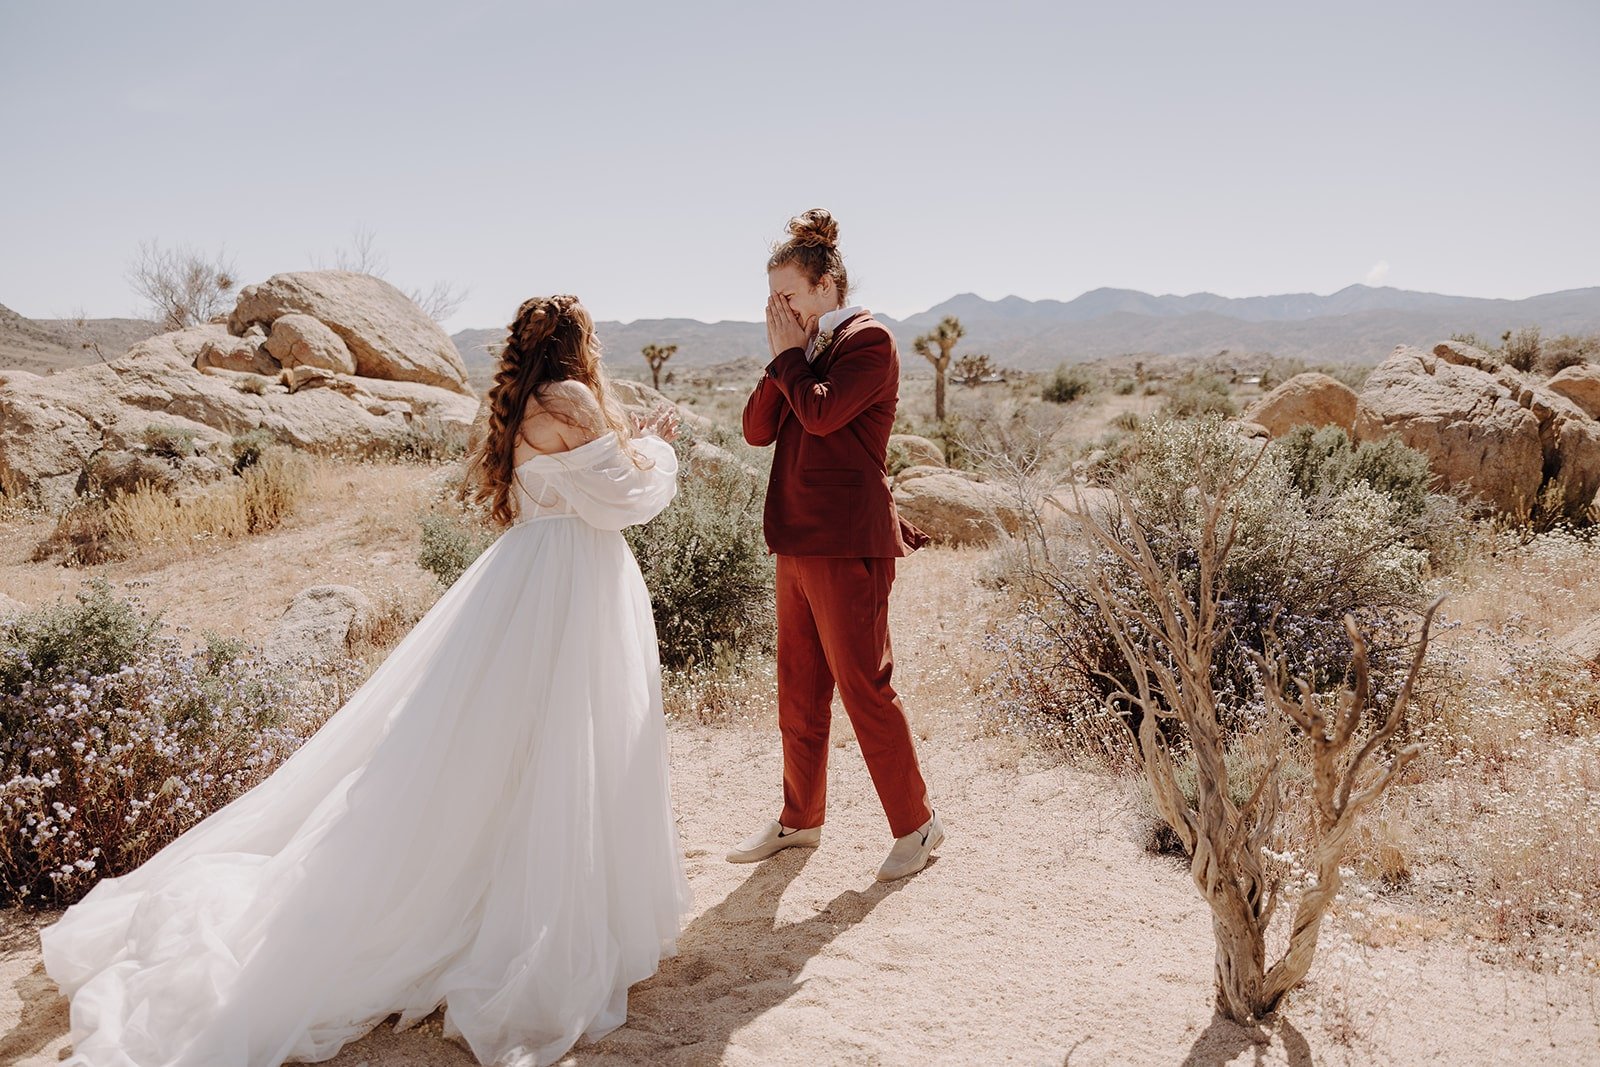 Groom reacts during wedding first look in the desert at Joshua Tree